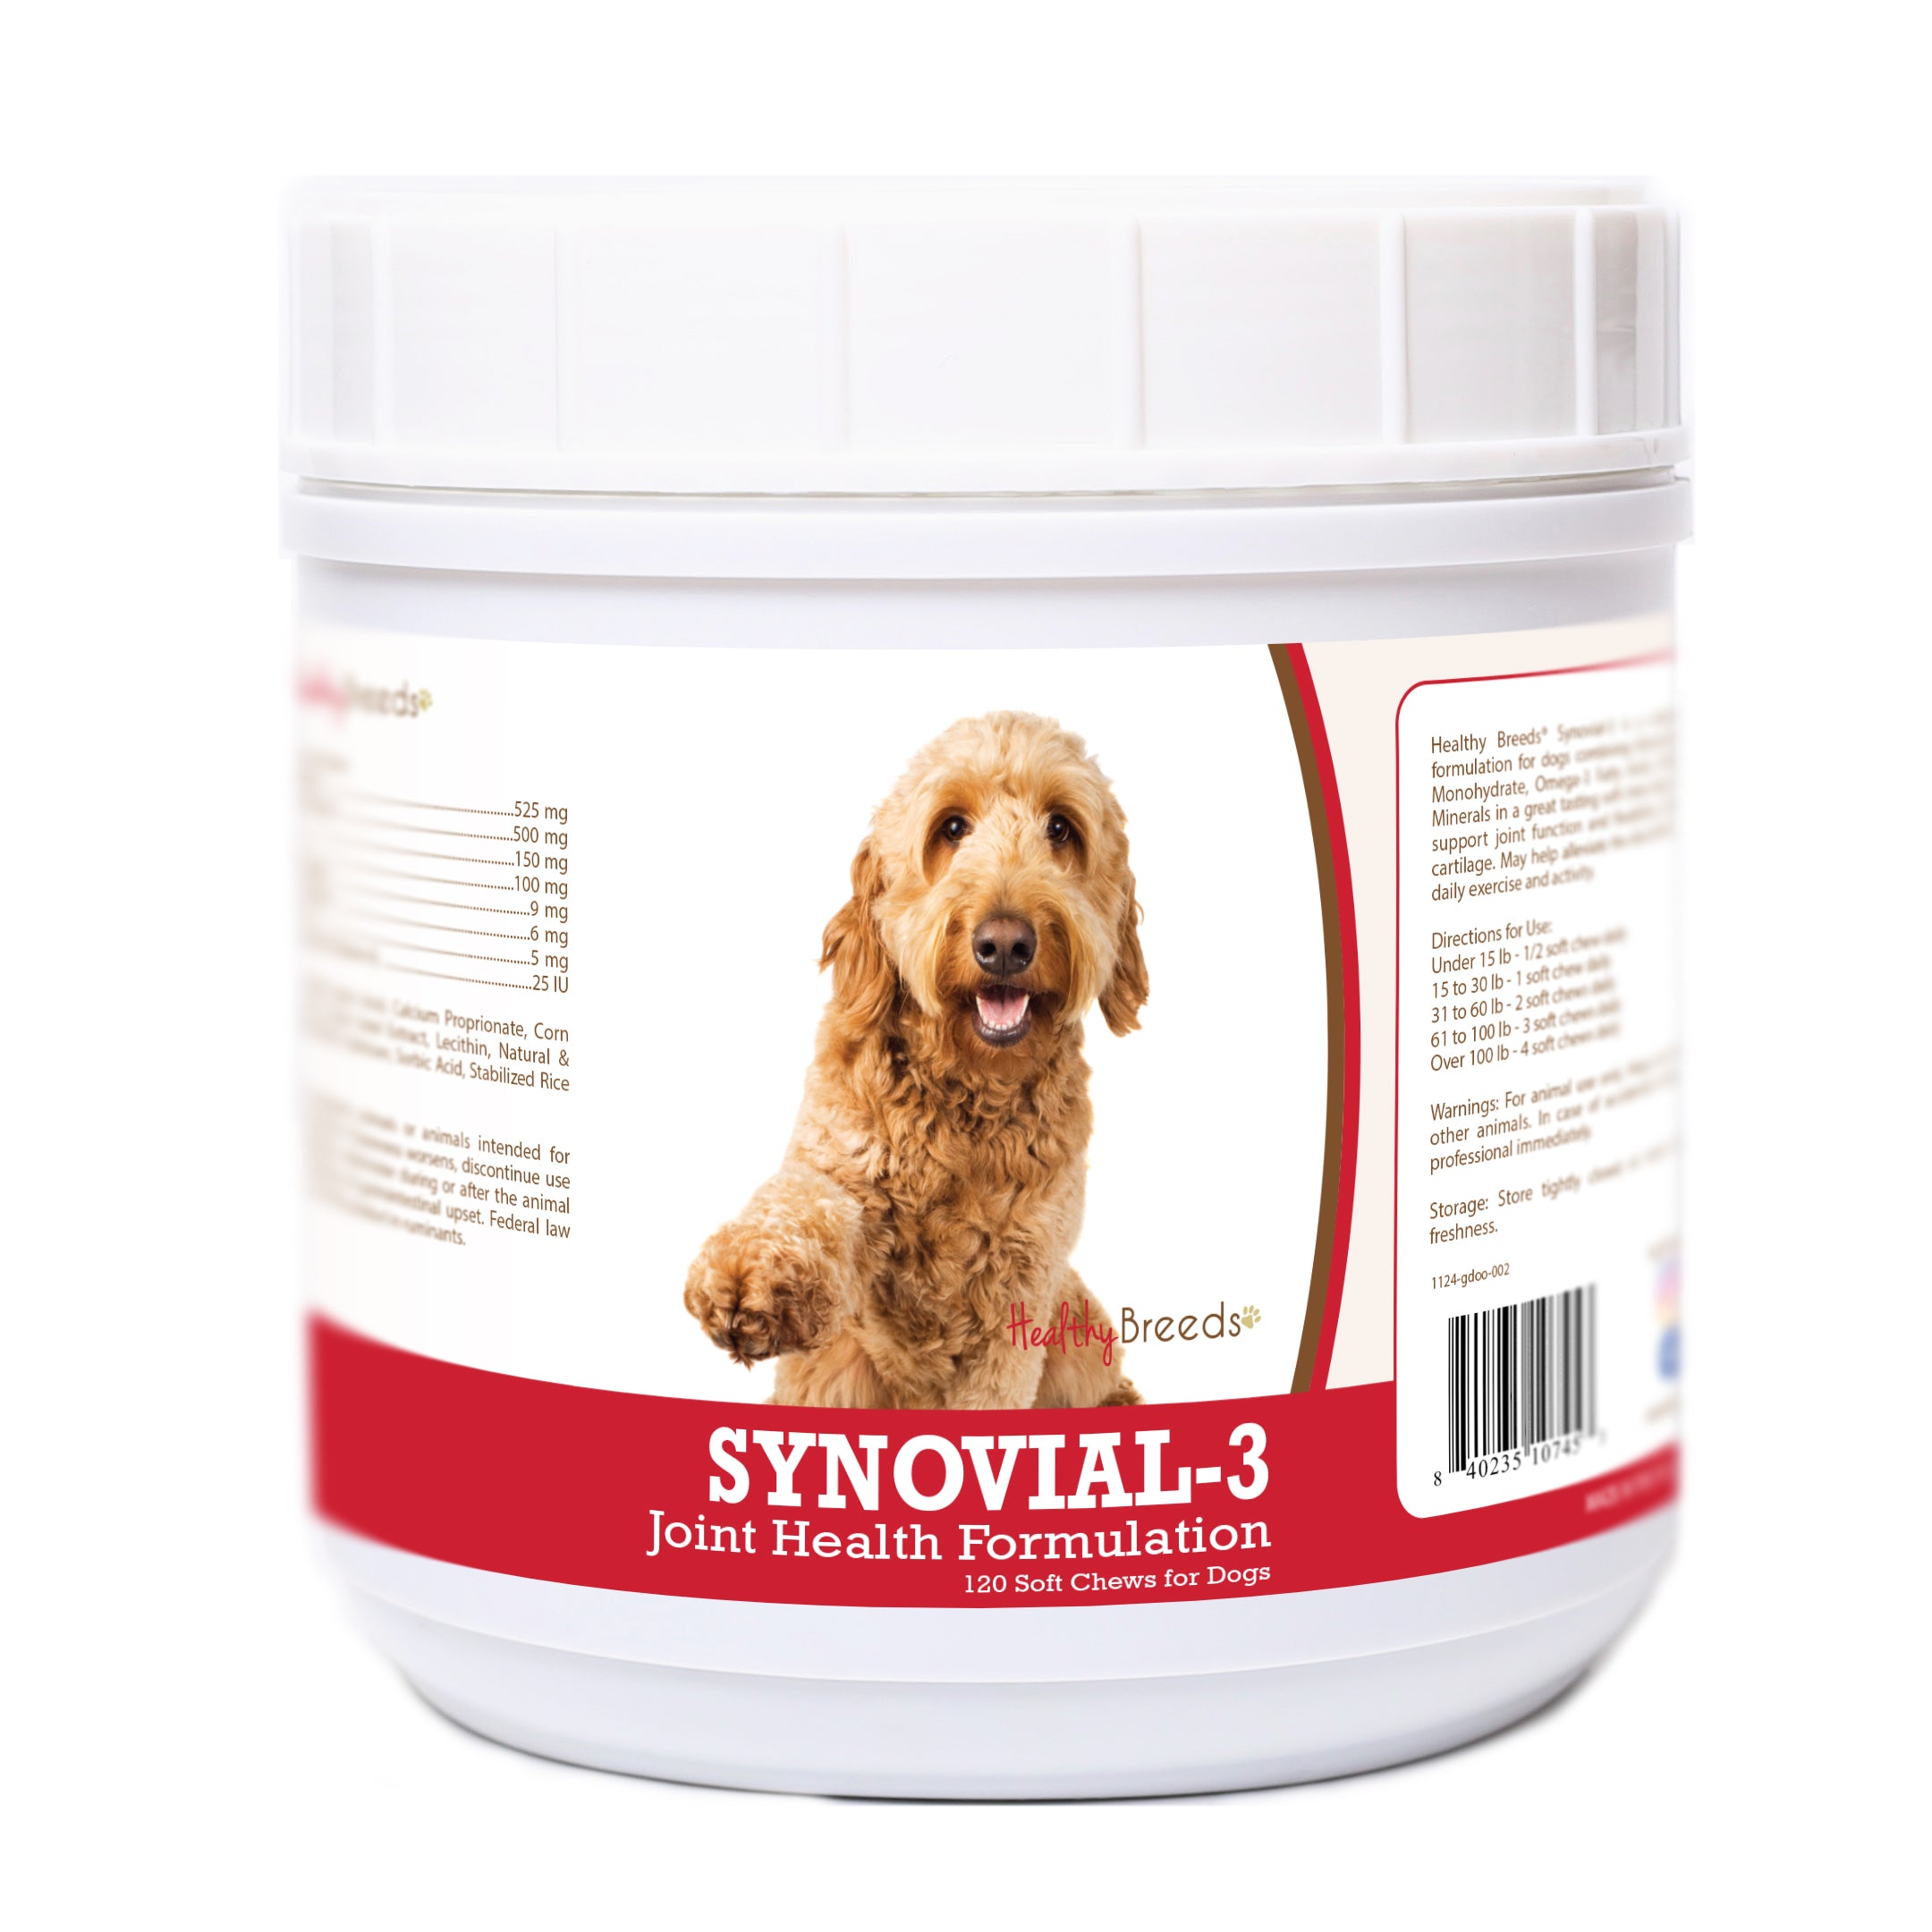 Goldendoodle Synovial-3 Joint Health Formulation Soft Chews 120 Count